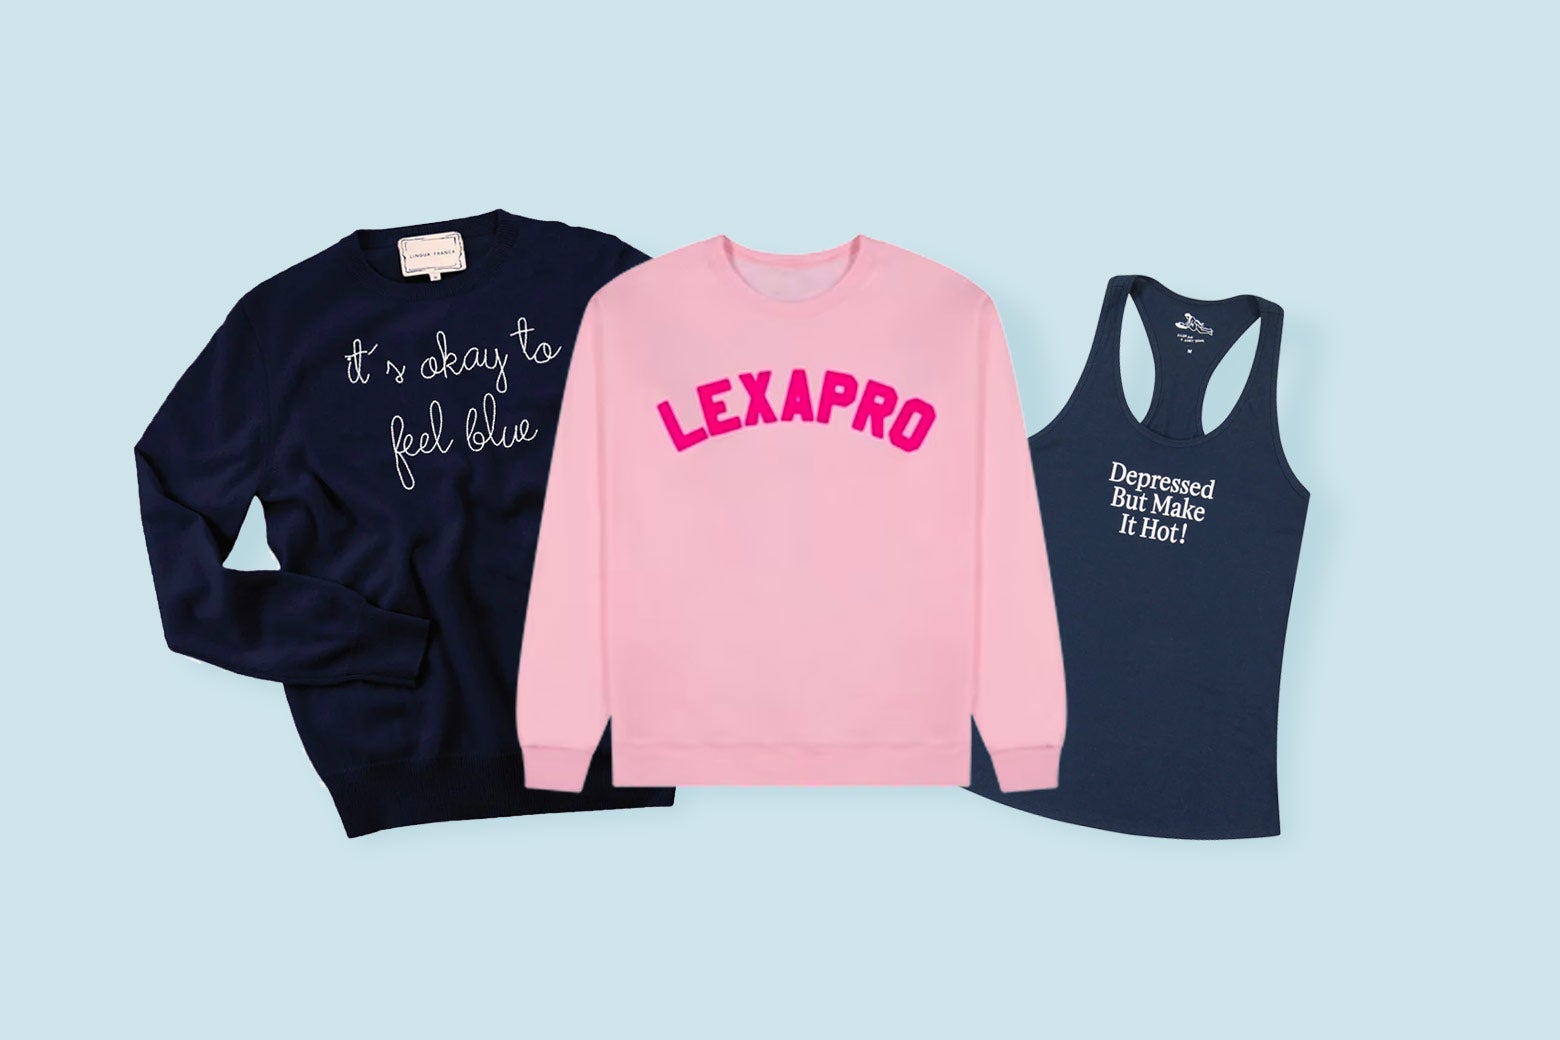 Mental health merch: Why I hate the Lexapro sweatshirt and other